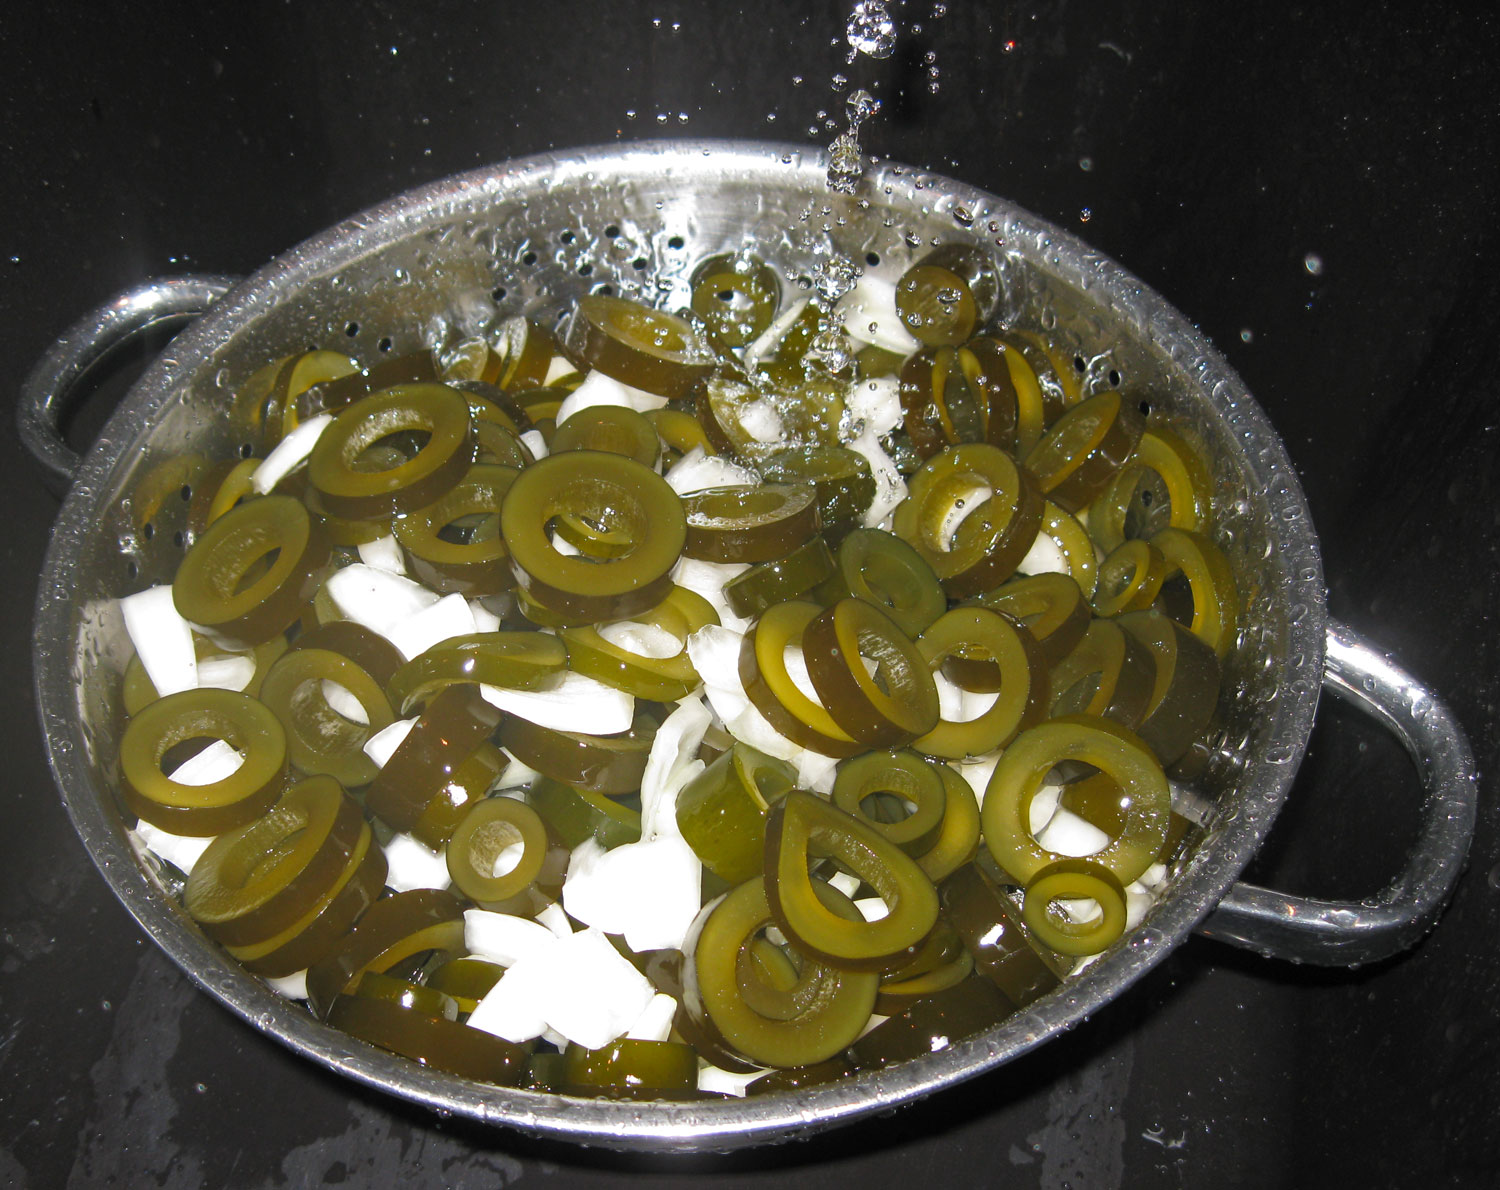 Salt kelp and onions in a large bowl, let stand for an hour, then rinse thoroughly with fresh water.